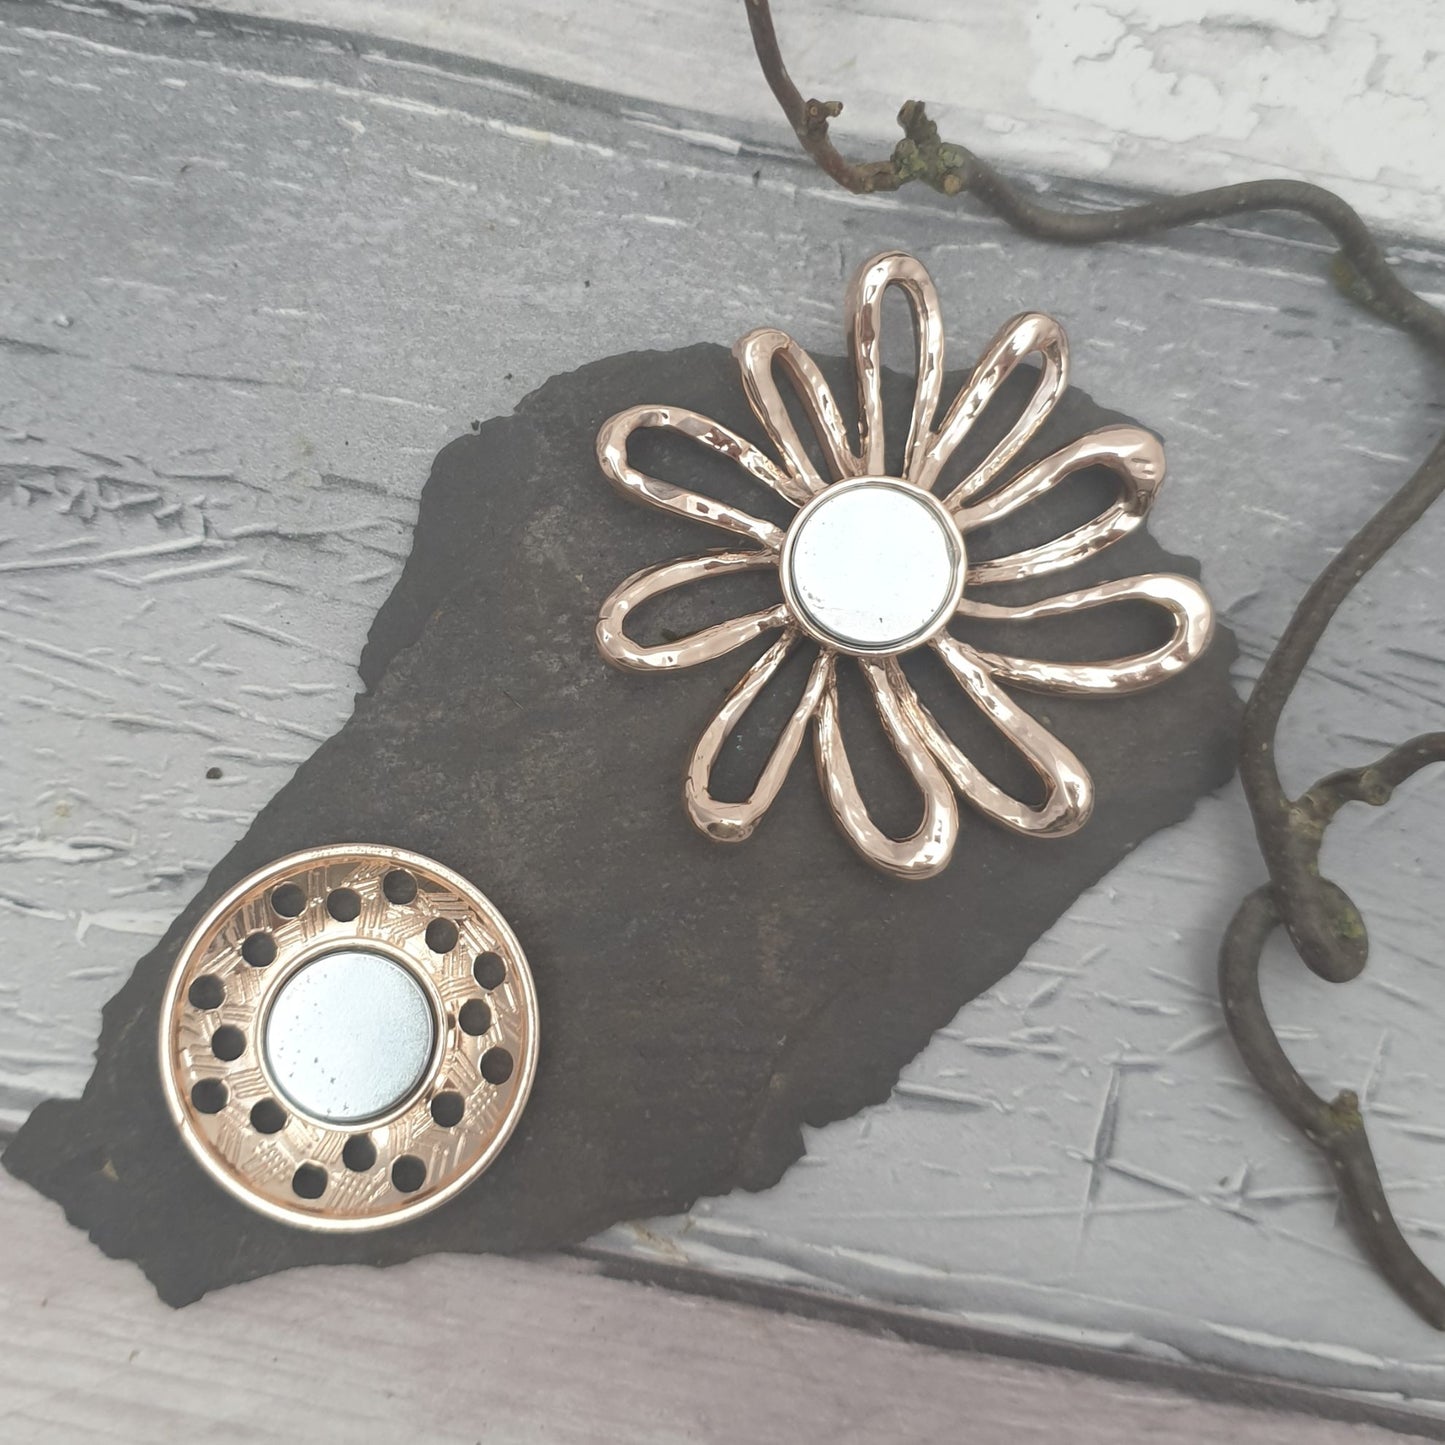 Rear of magnetic flower shaped brooch showing the 2 pieces and their magnets